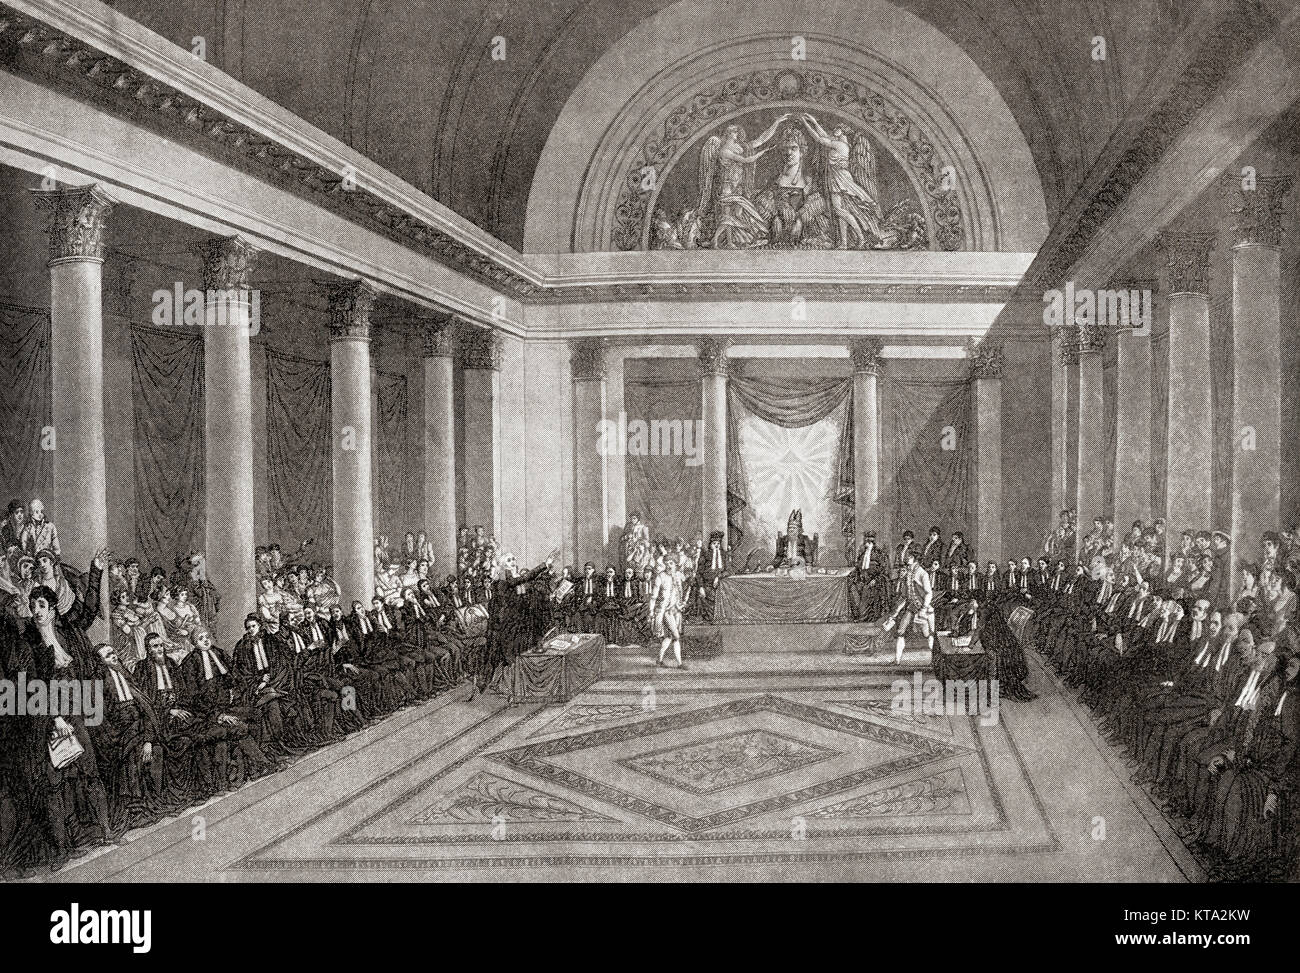 The Grand Sanhedrin convened by Emperor Napoleon I of France in 1806.  From Hutchinson's History of the Nations, published 1915. Stock Photo